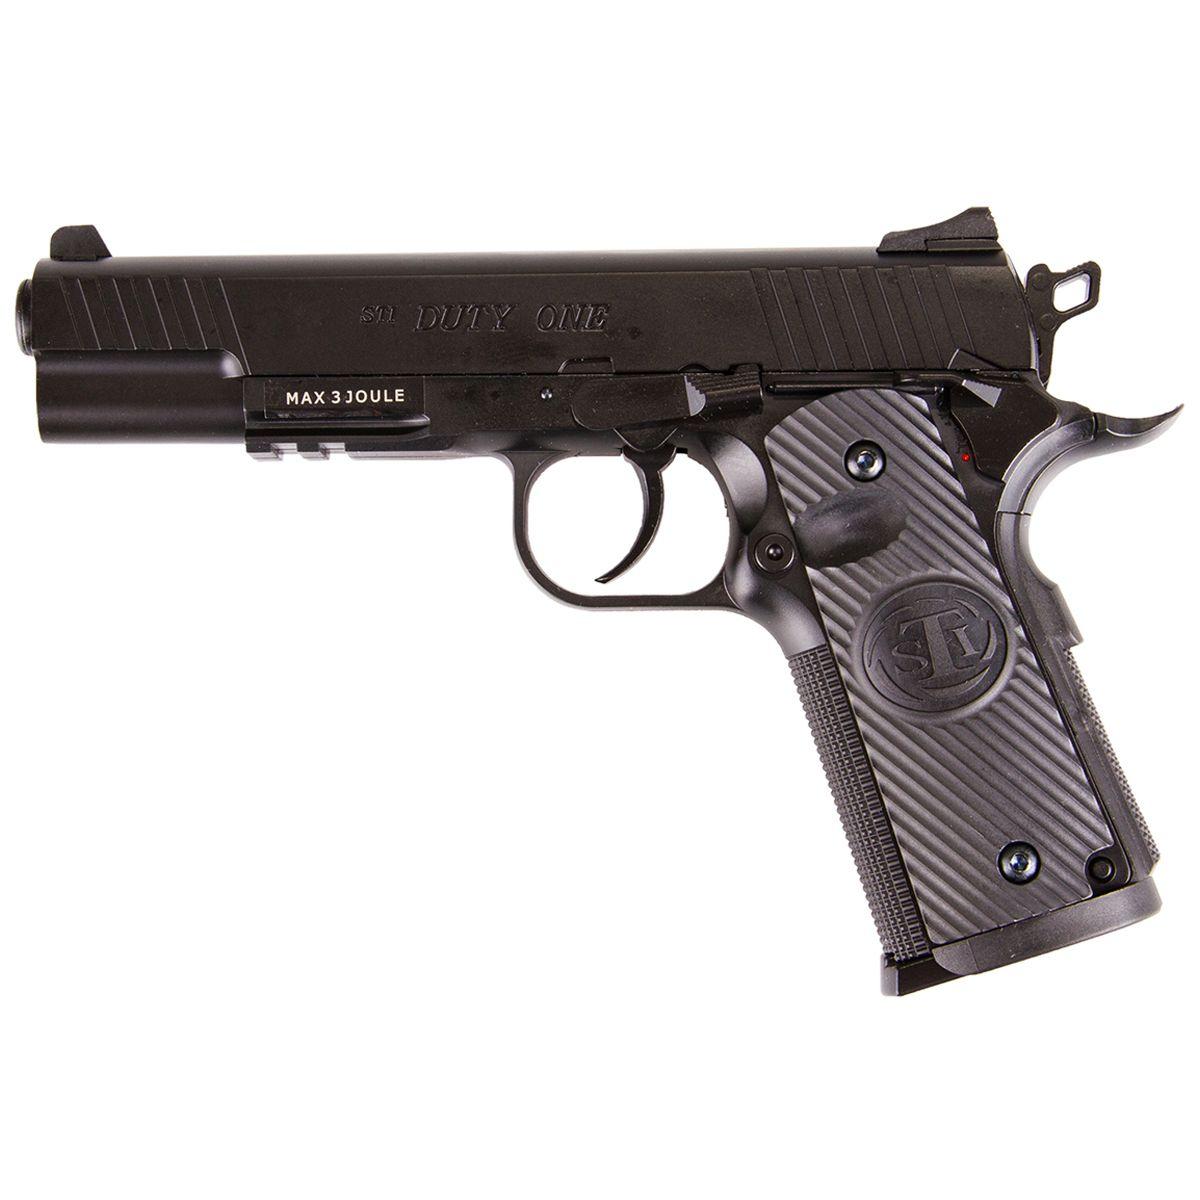 Explore the ASG STI Duty One 1911 Blowback Airsoft Pistol - semi-automatic, metal slide, integrated weaver rail, and discreet CO2 compartment. Available at ReplicaAirguns.ca.